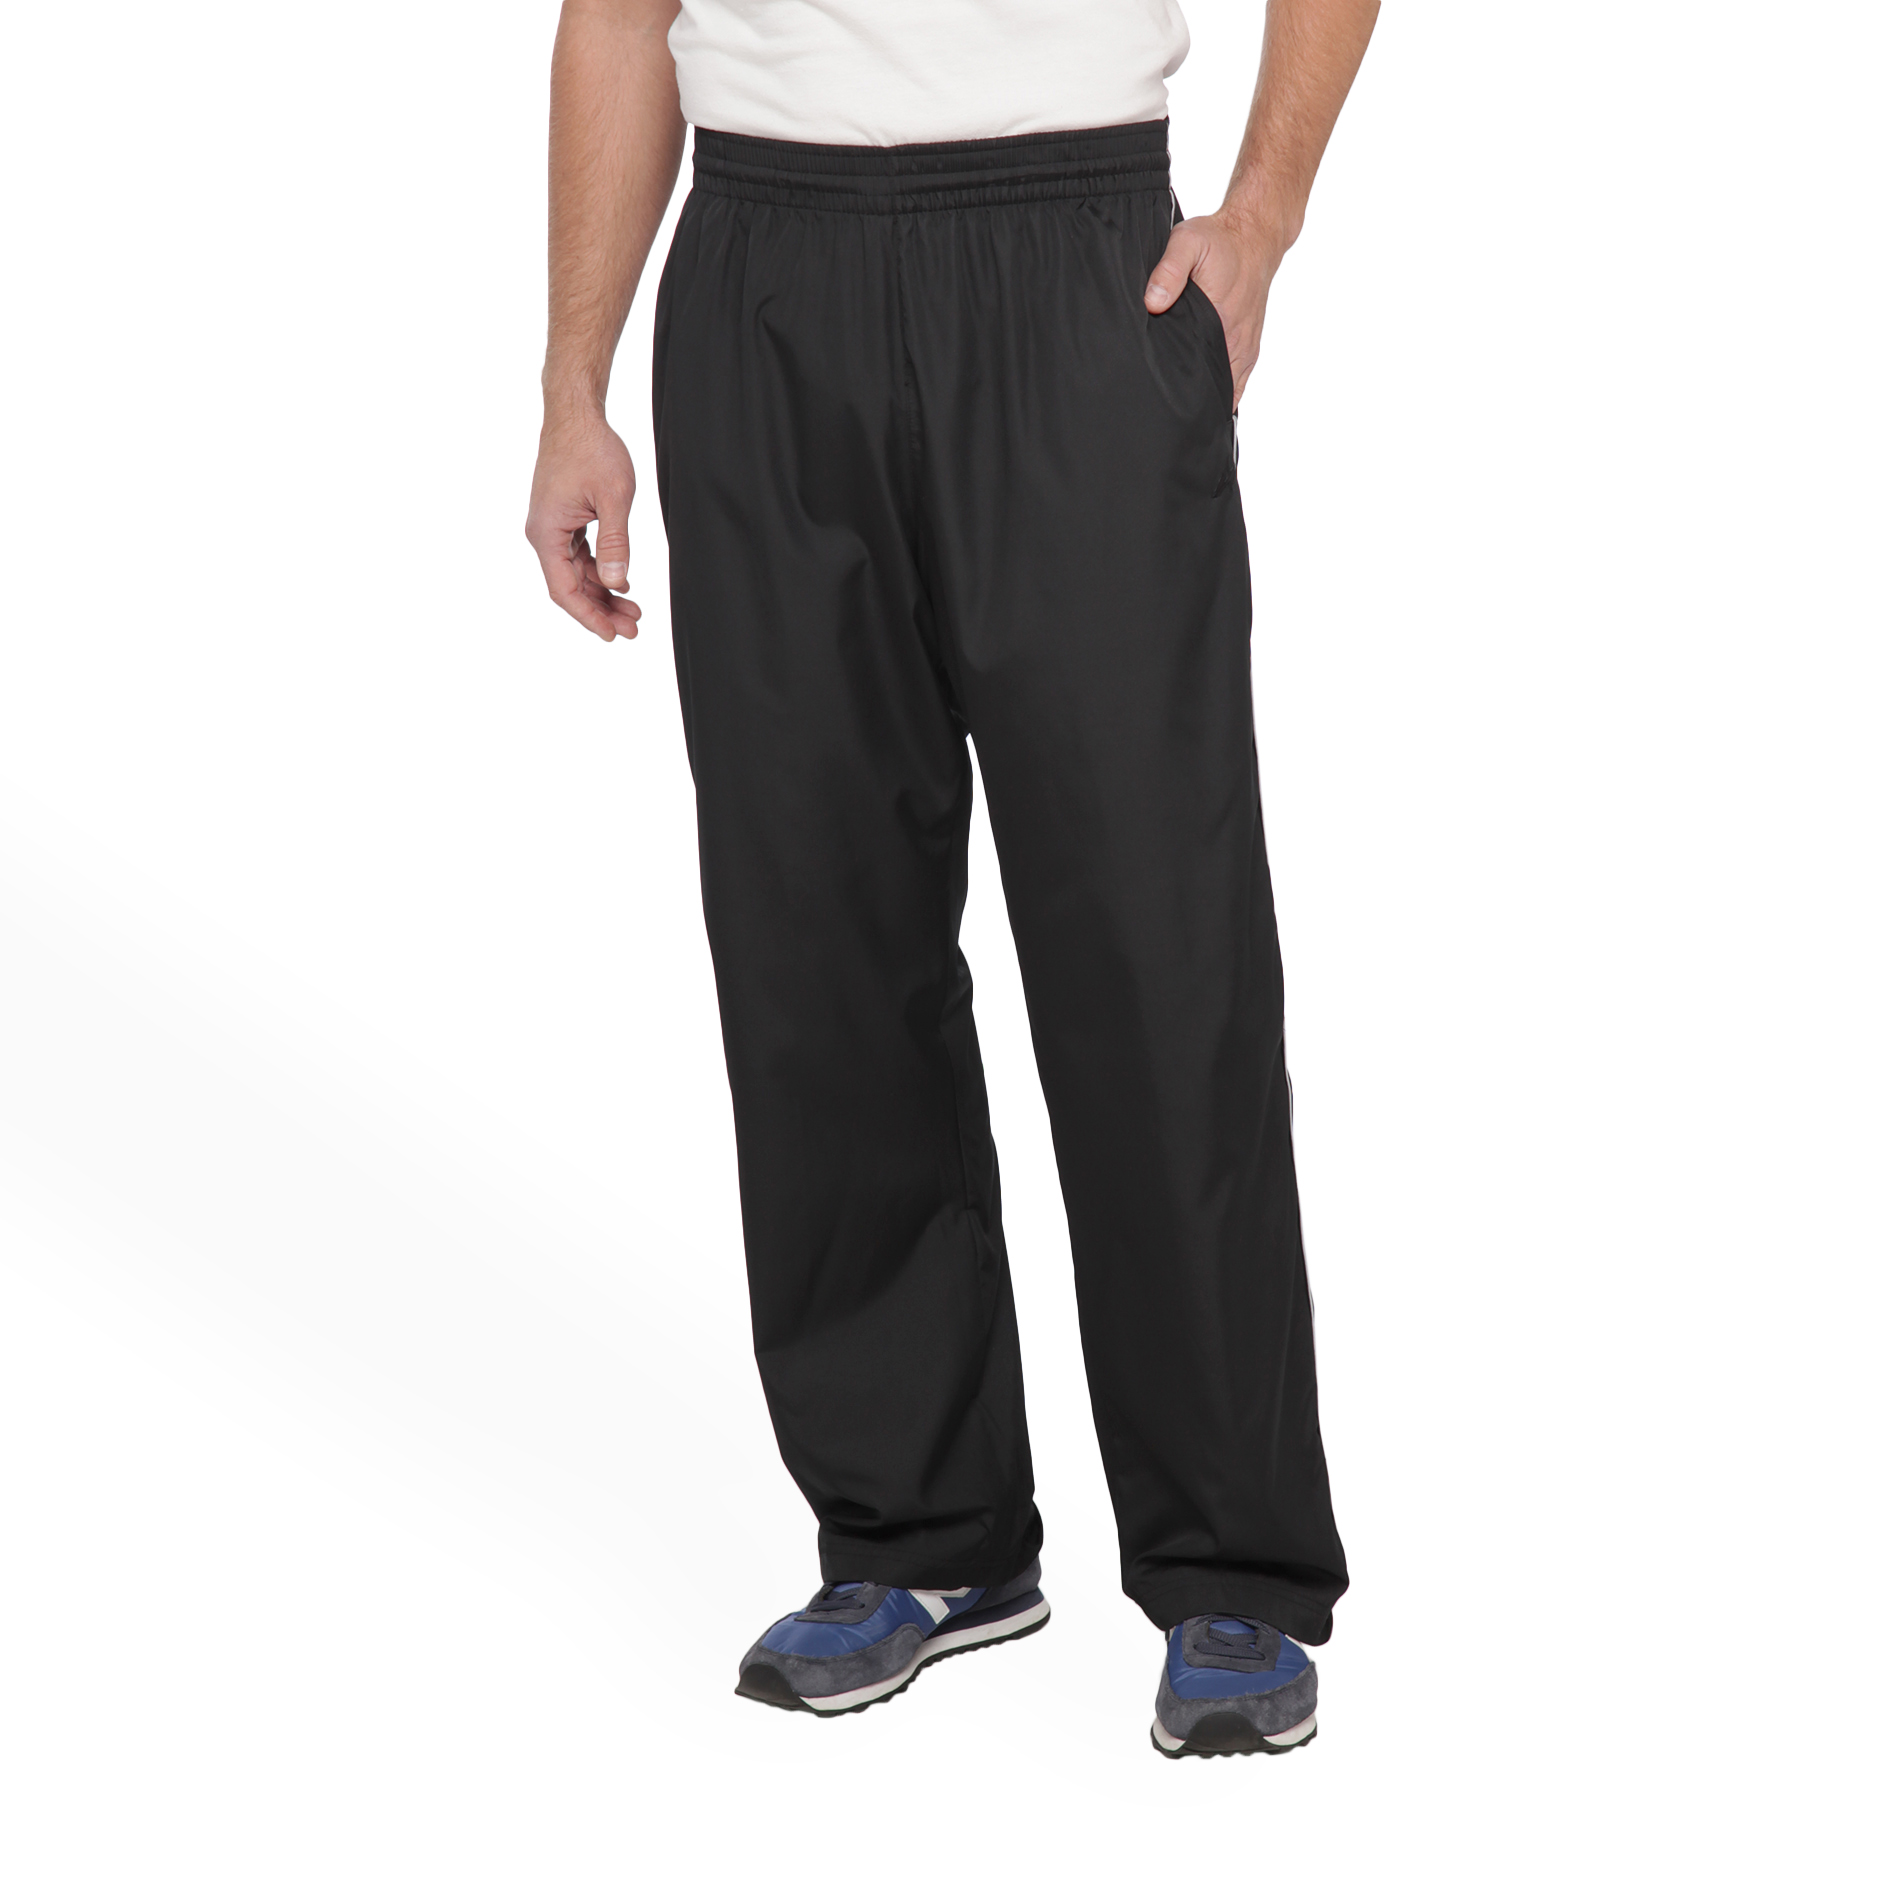 Athletech Men's Nylon Pants with Mesh Lining | Shop Your Way: Online ...